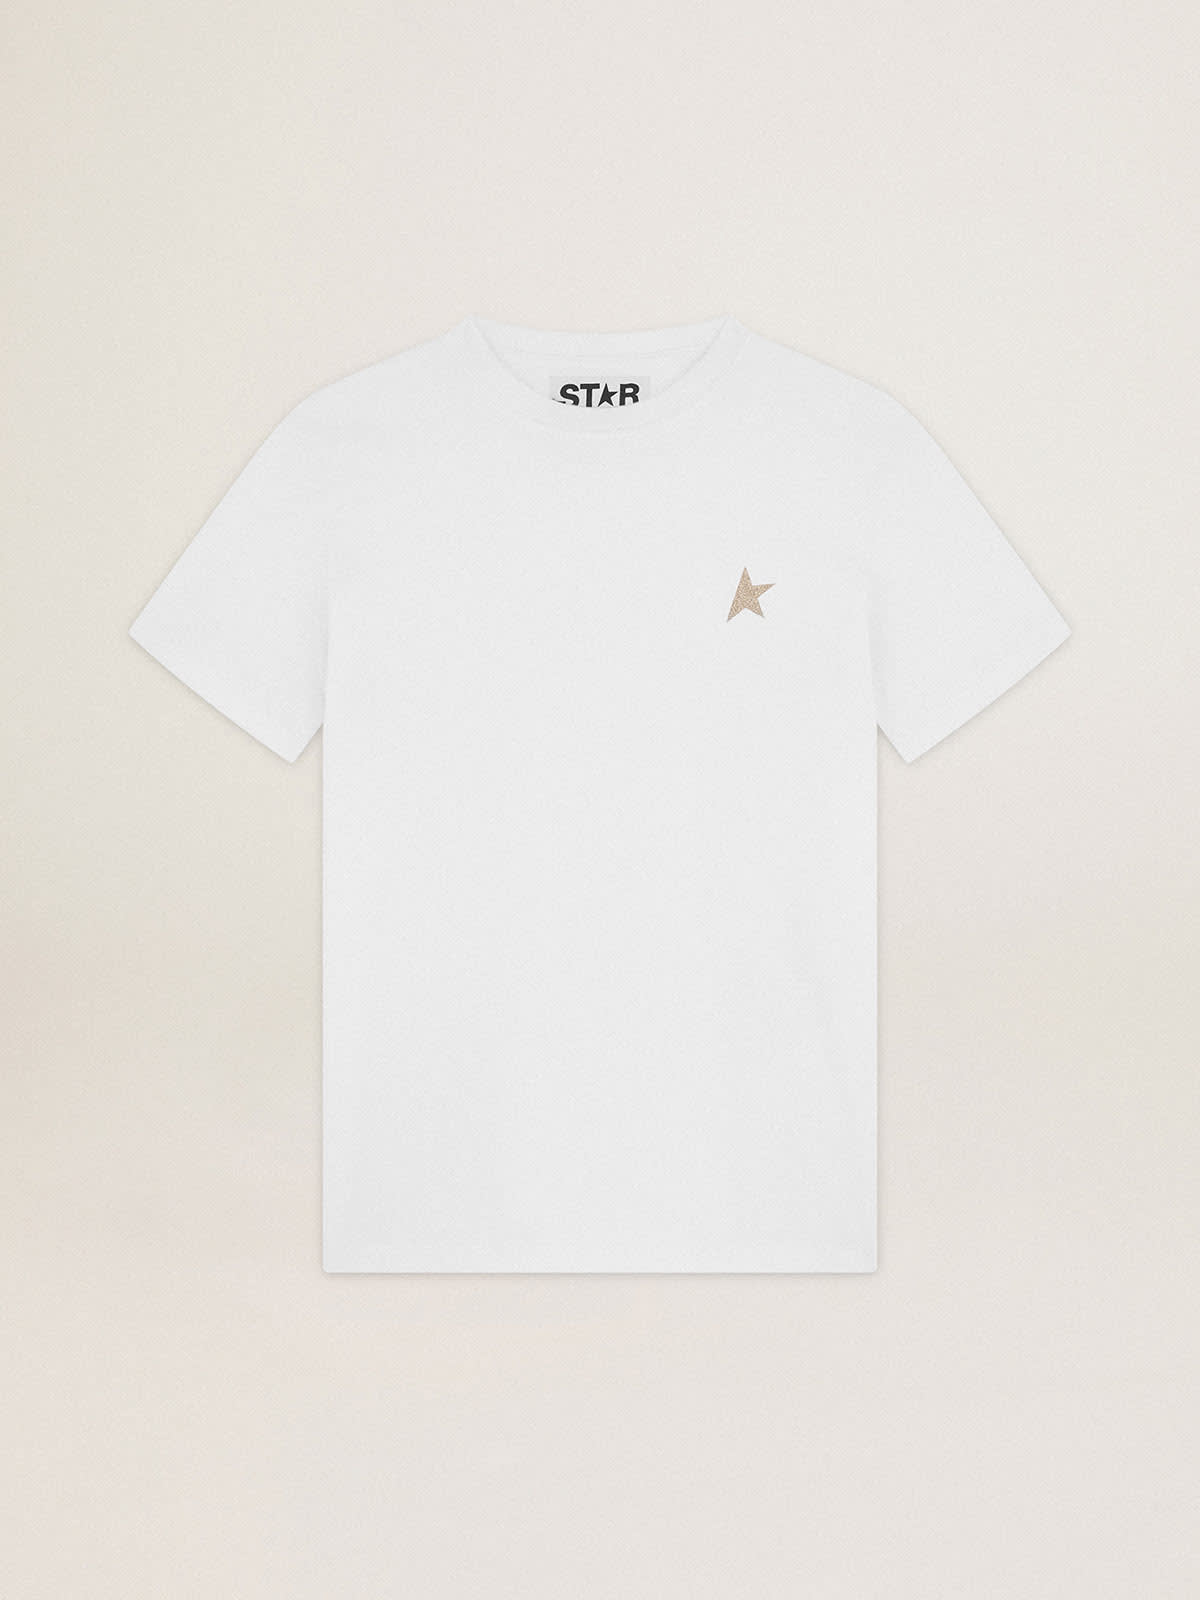 Golden Goose - Women’s white T-shirt with star in gold glitter on the front in 